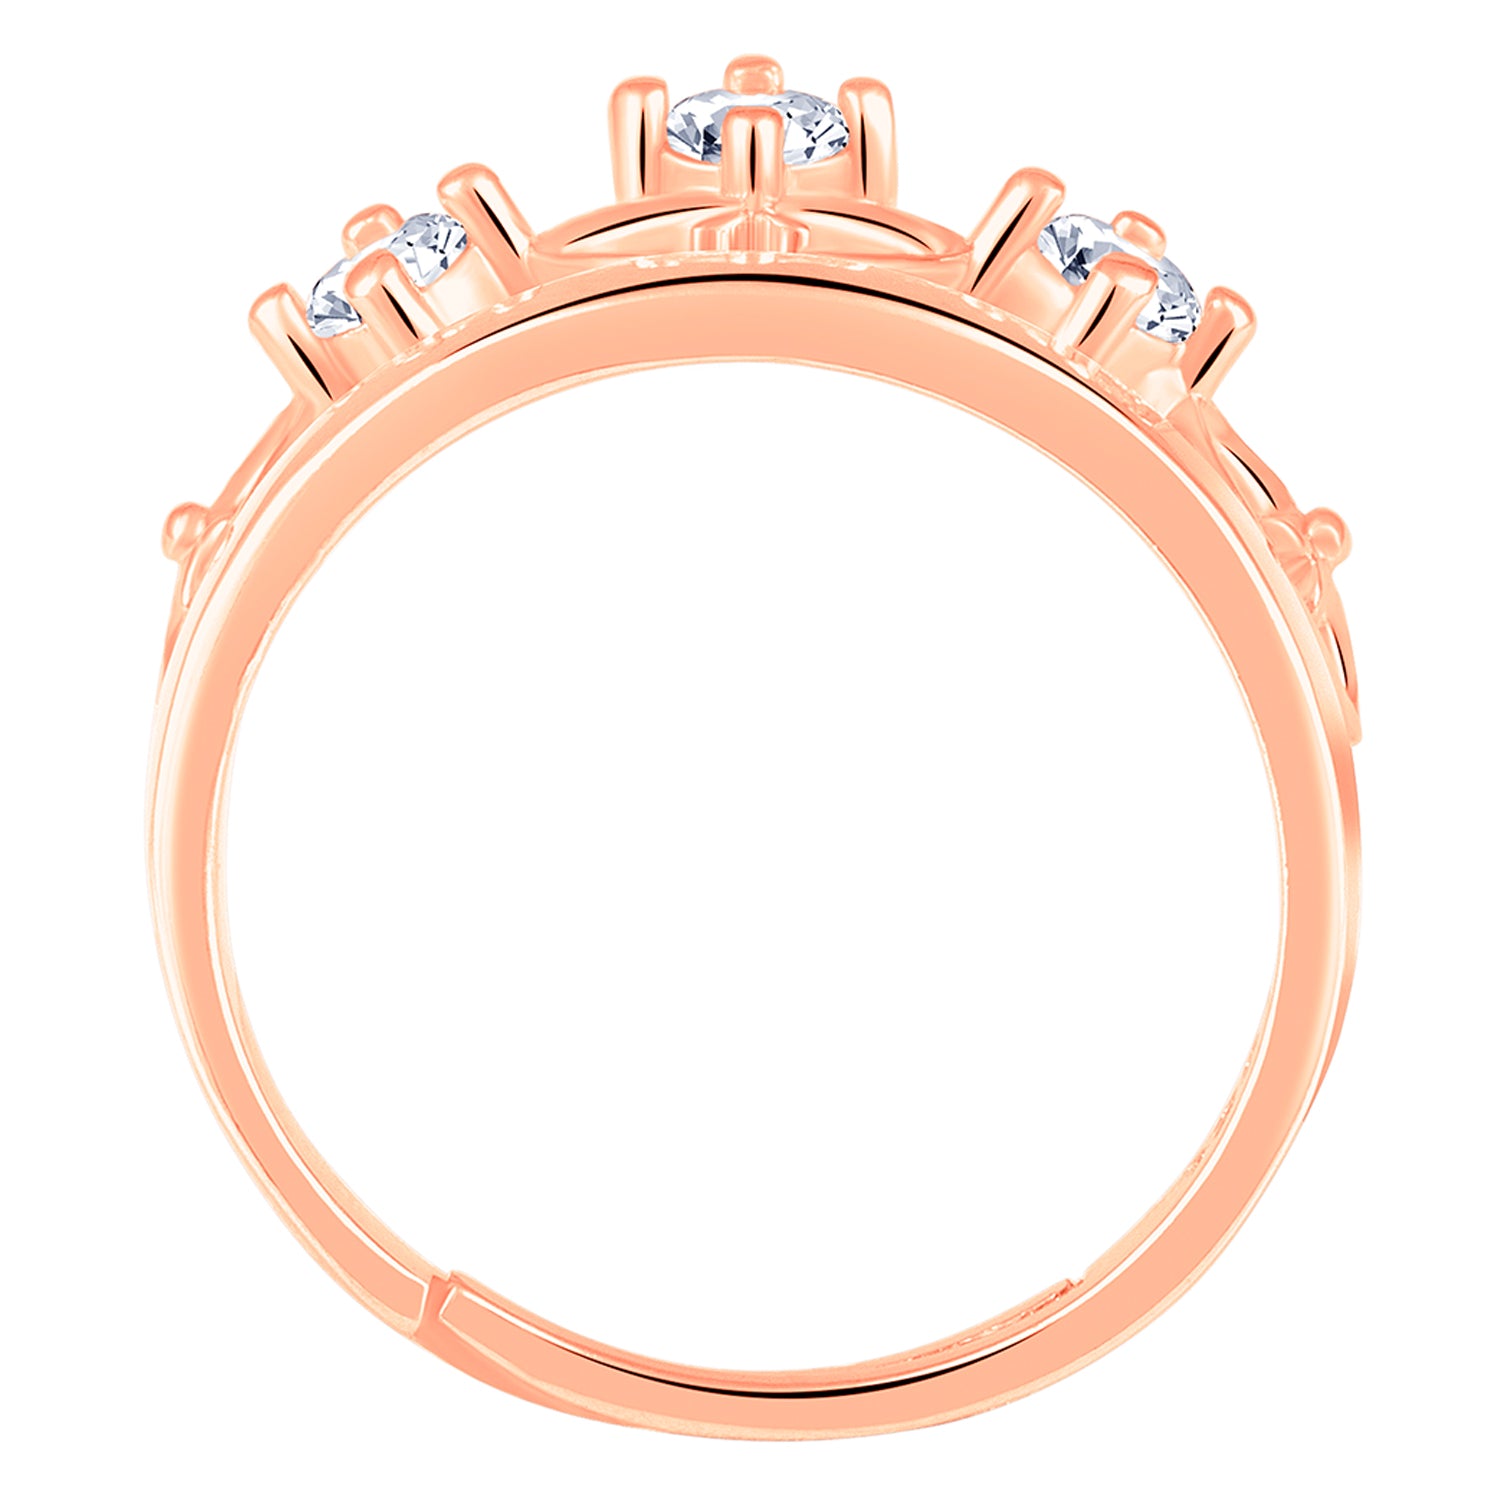 Exquisite Love Crown Finger Ring